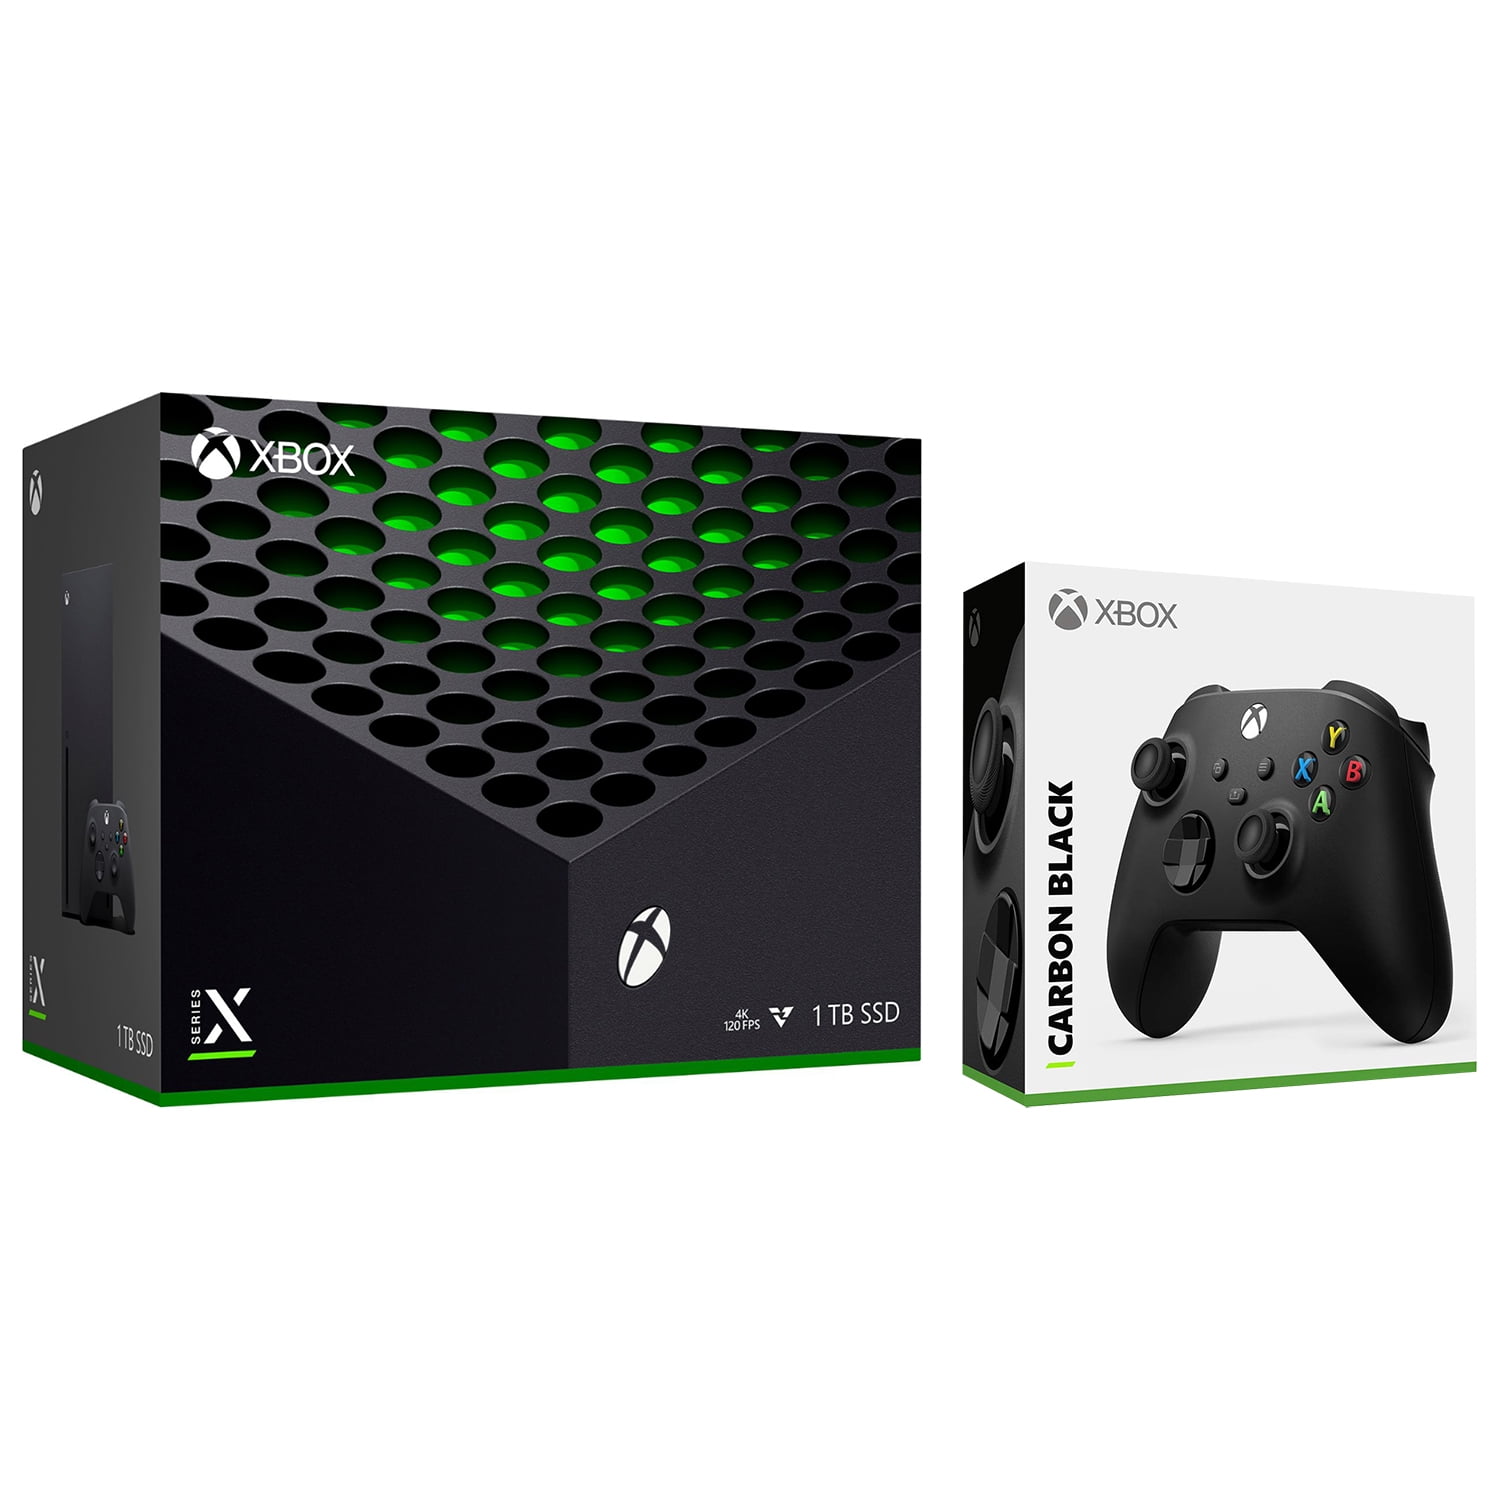 Factory Recertified Xbox One X Kit - Includes Console and Wireless